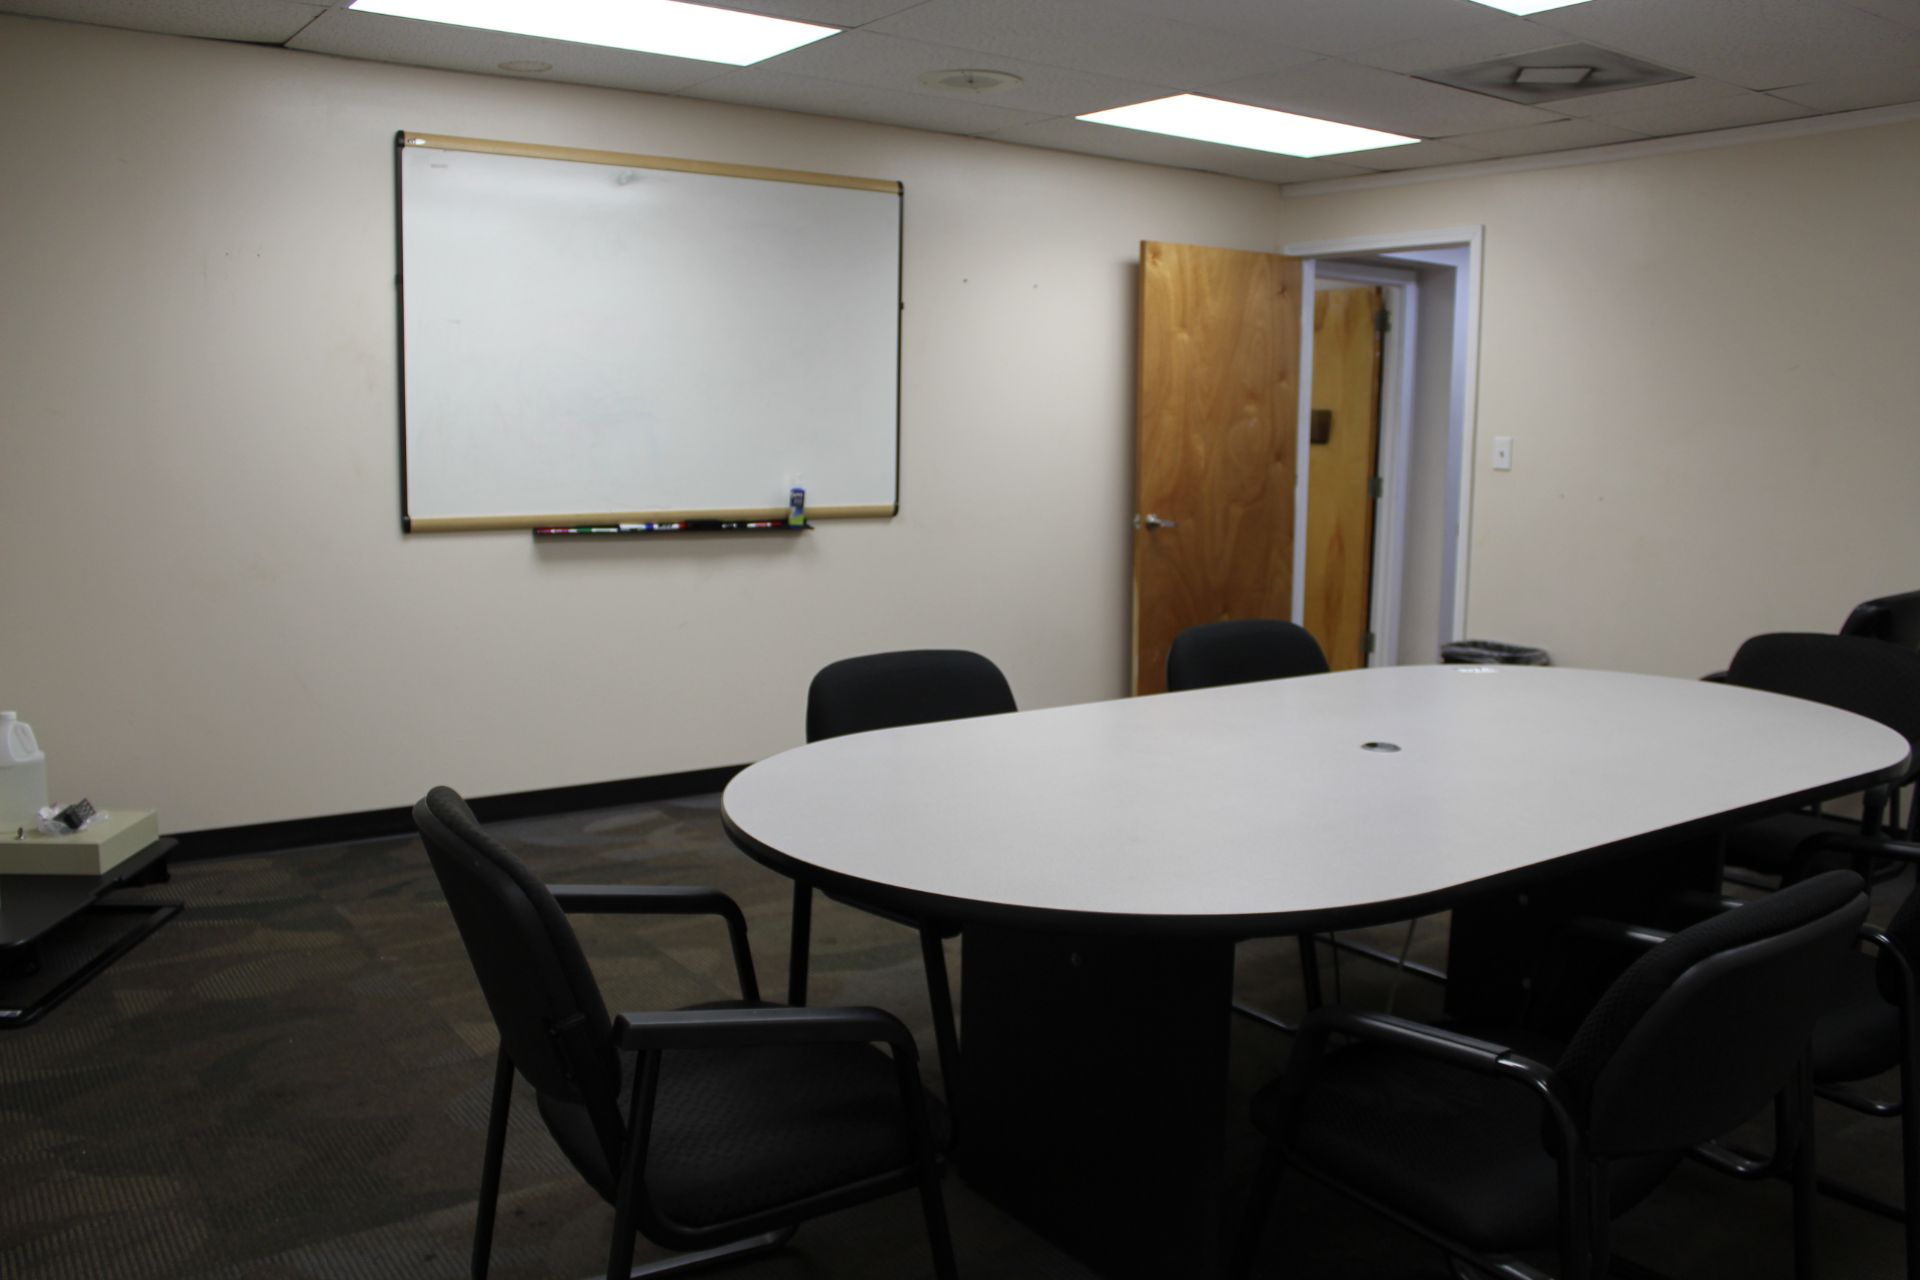 CONFERENCE TABLE, CHAIRS, AND 2 WHITE BOARDS - Image 3 of 4